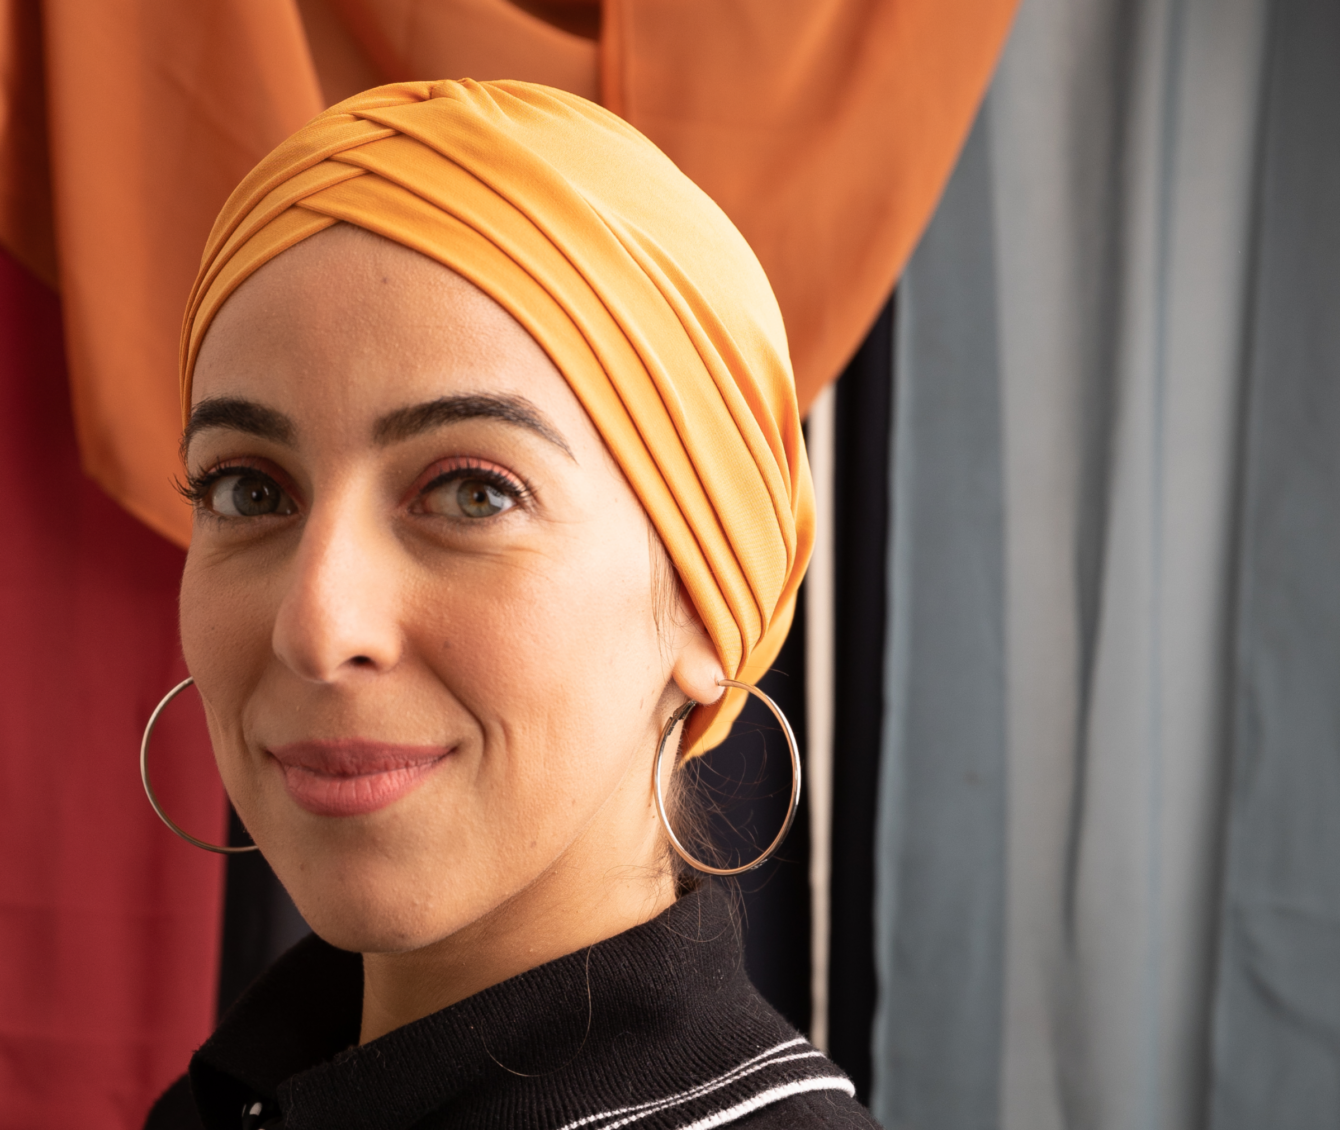 A woman with large hoop earrings and a yellow headscarf stands at an angle to the camera, smiling with closed lips